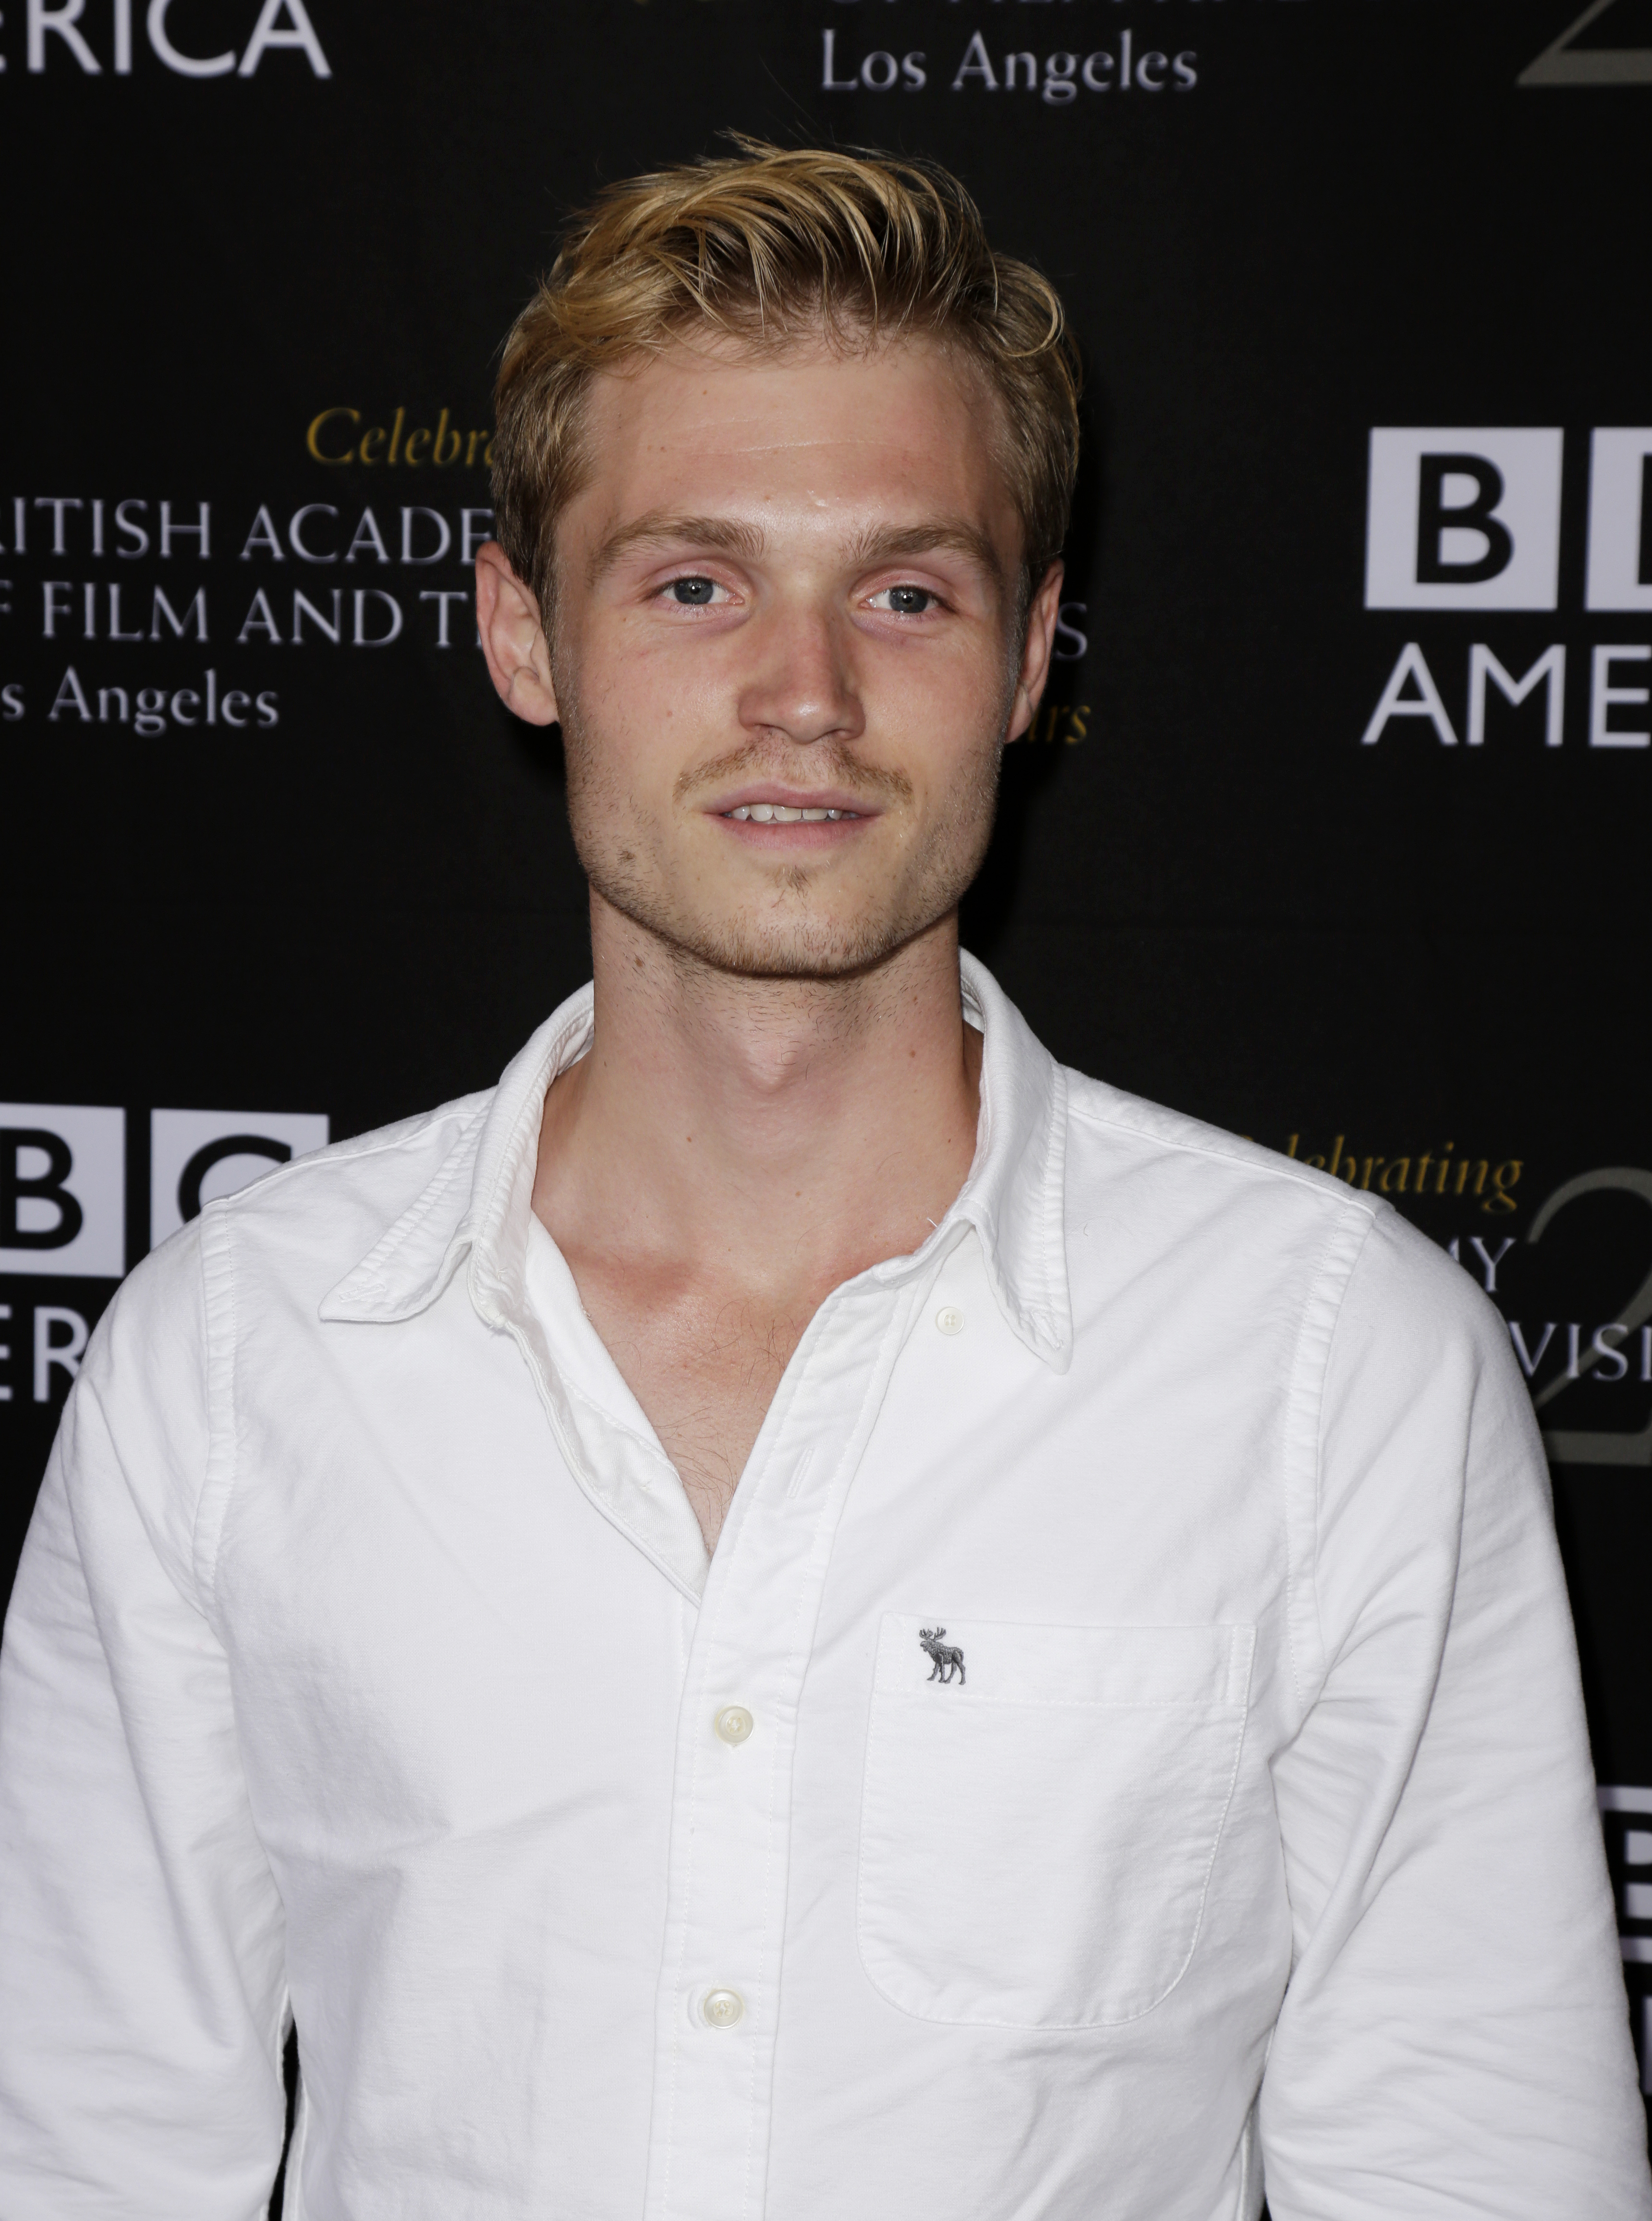 Robbie Jarvis arrives on the red carpet during the British Academy of Film and Television Arts (BAFTA) Los Angeles TV Tea 2012 held at the London Hotel in Los Angeles, on September 22, 2012. | Source: Getty Images